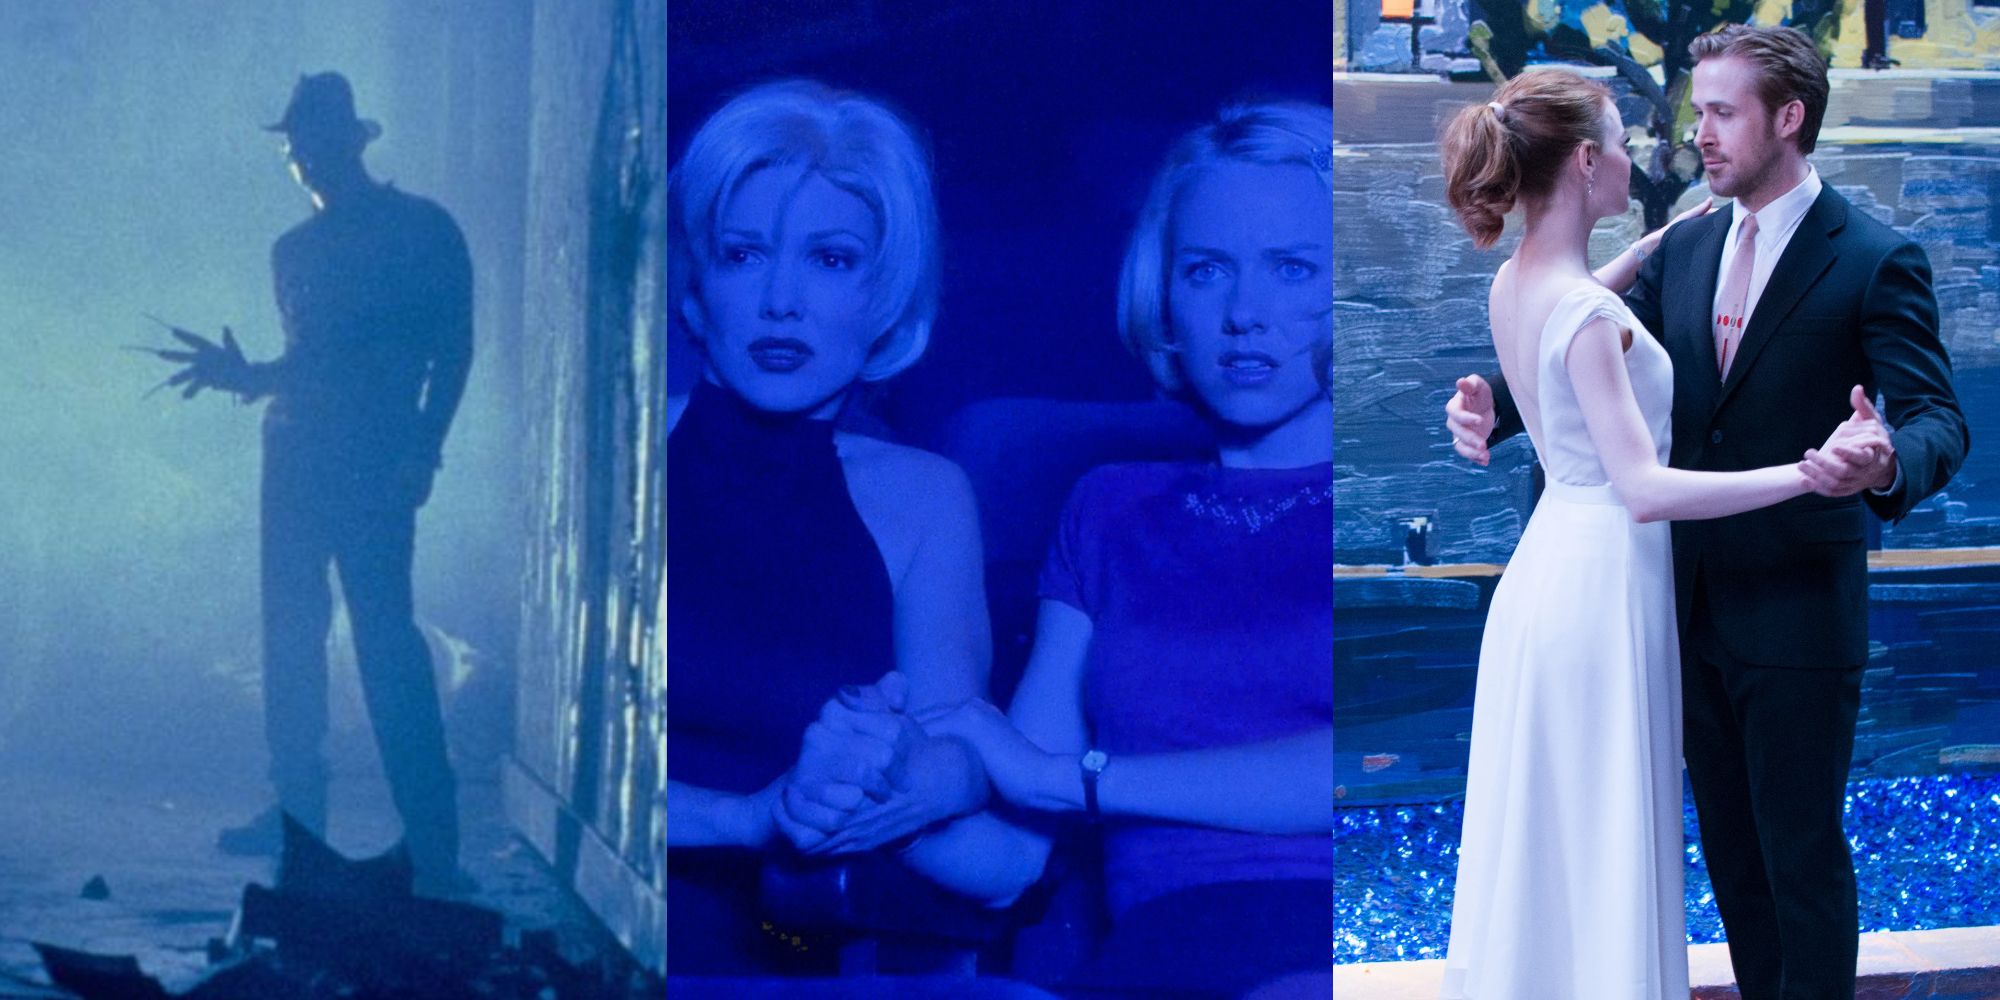 Side by side stills from A Nightmare On Elm Street, Mulholland Drive, and La La Land